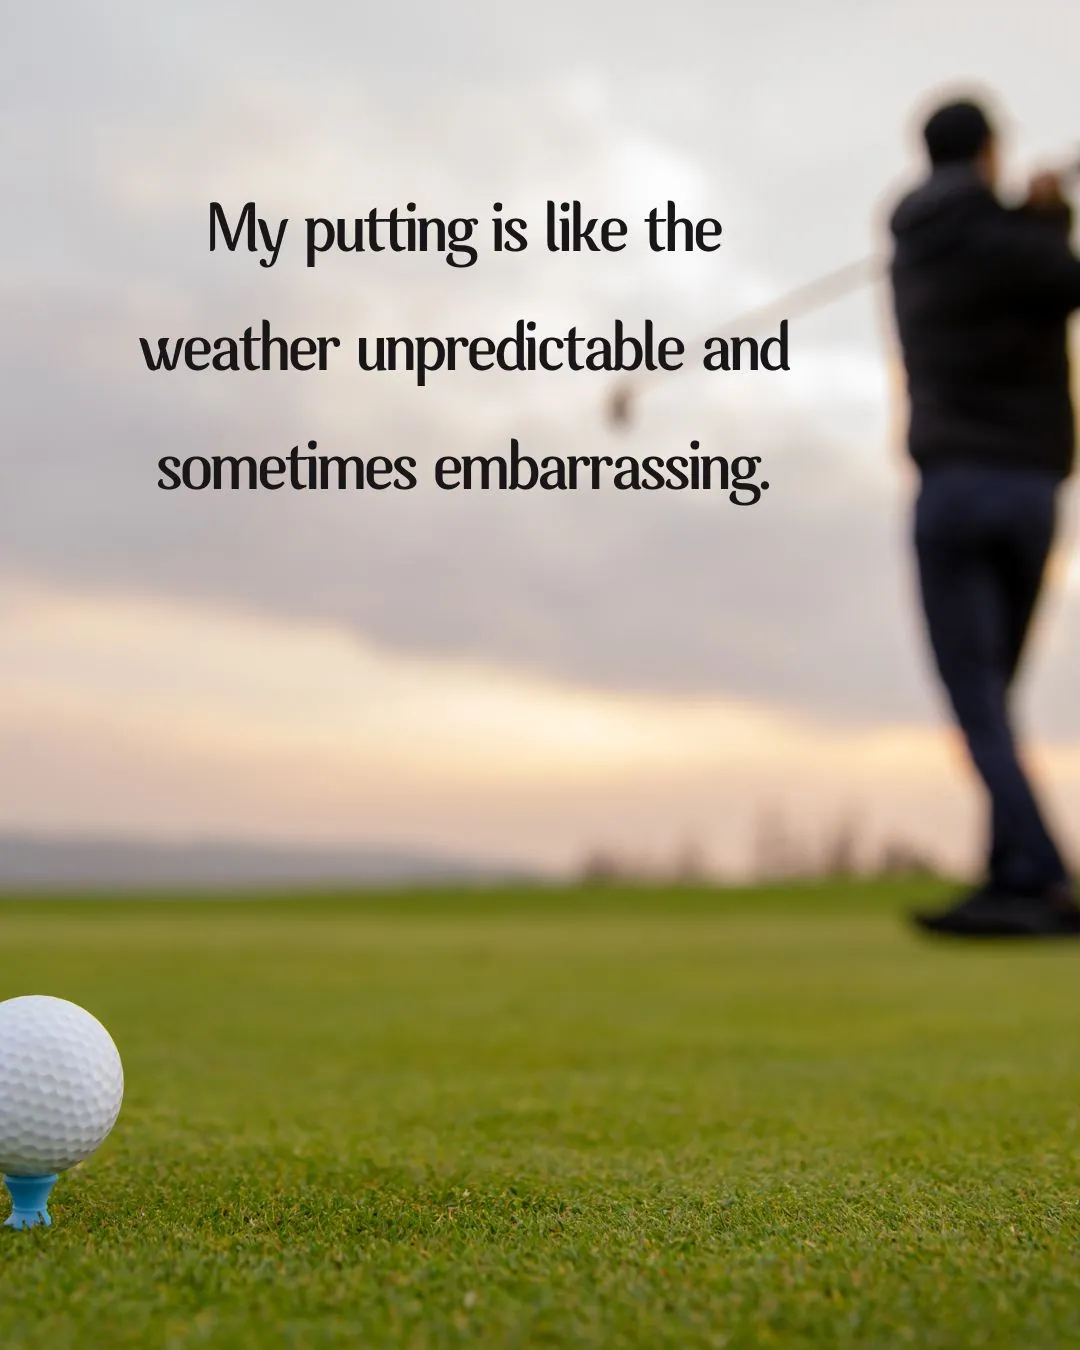 Funny Golf Quotes Putting 1